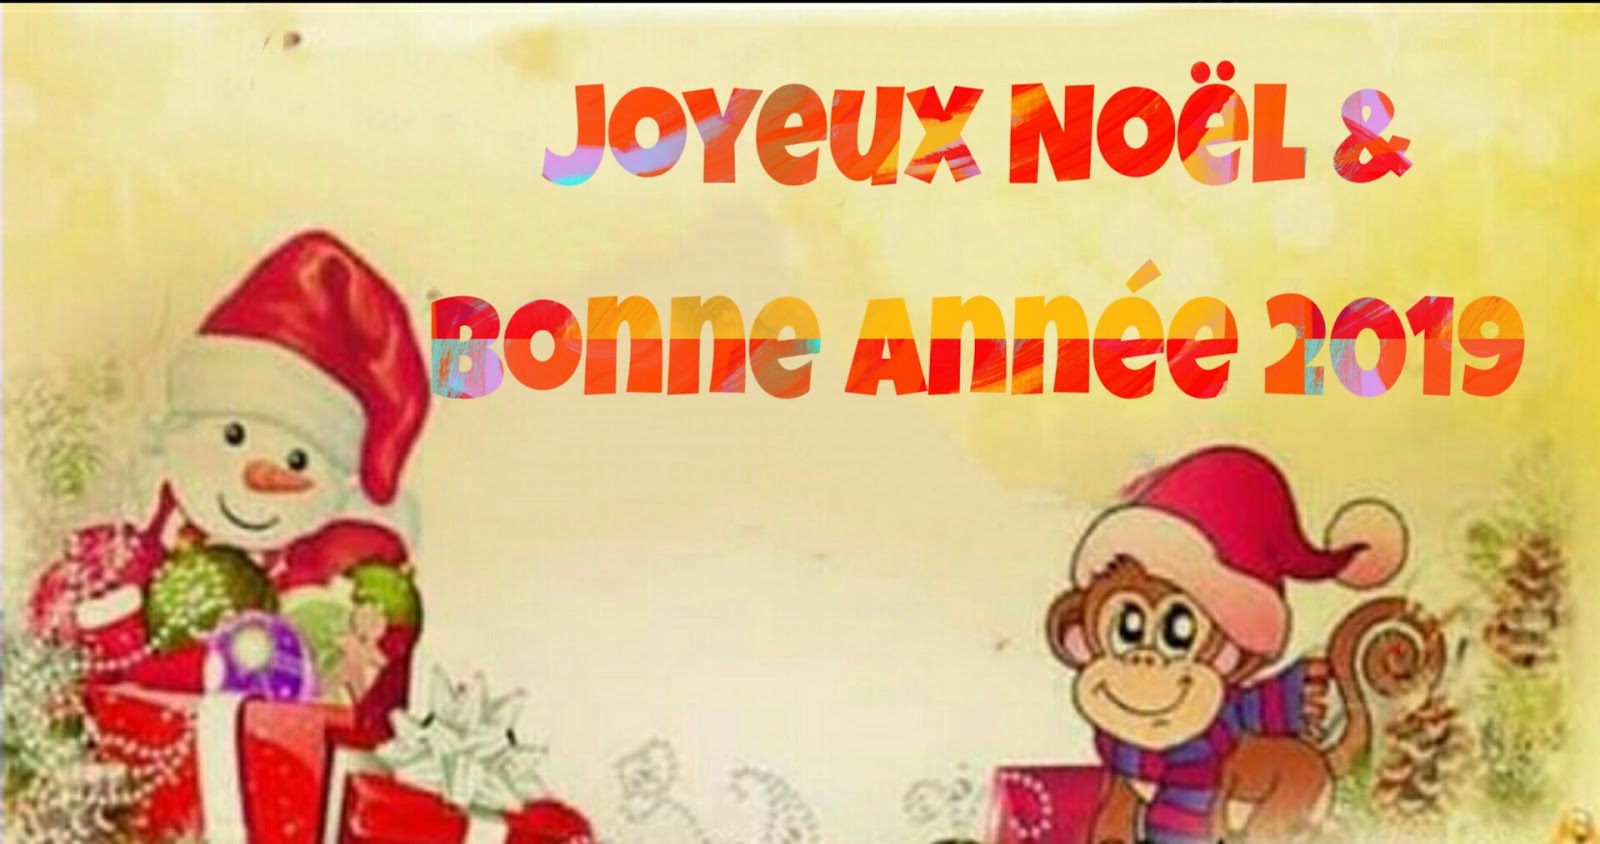 How To Say Happy New Year In French 2019 And French Greeting Happy